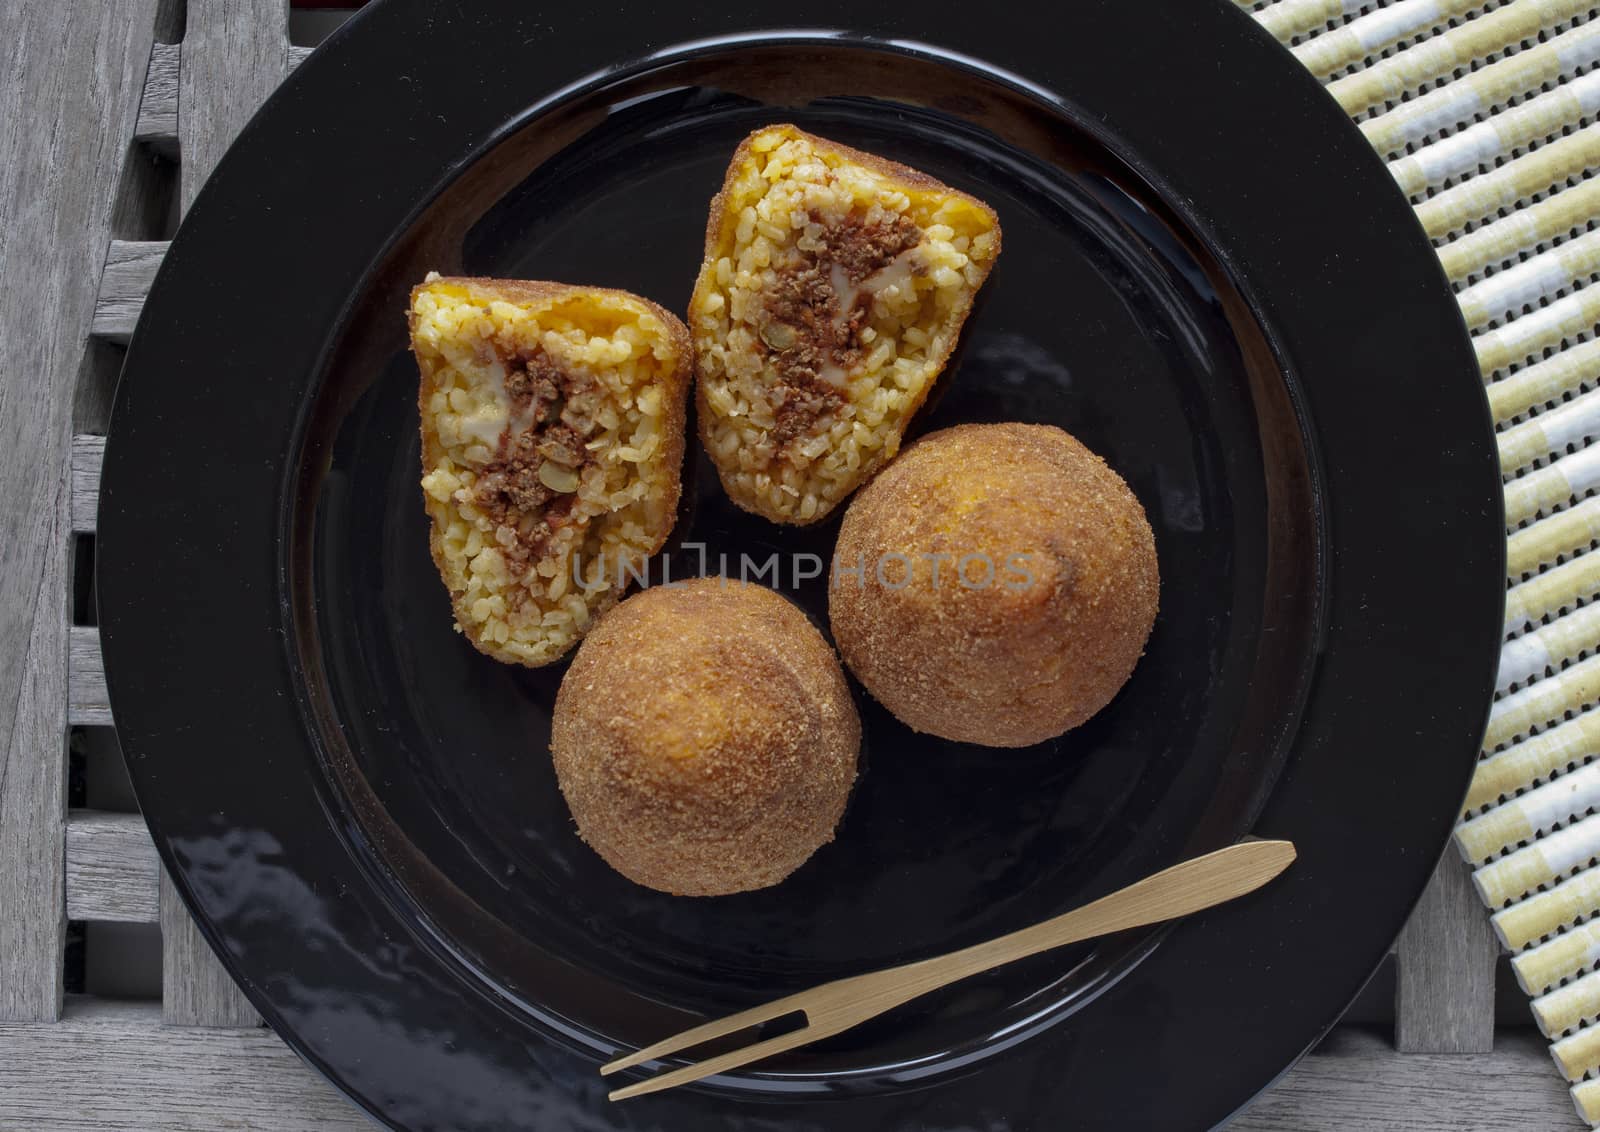 typical italian food: sicilian food called "arancini", made with rice and ragout inside